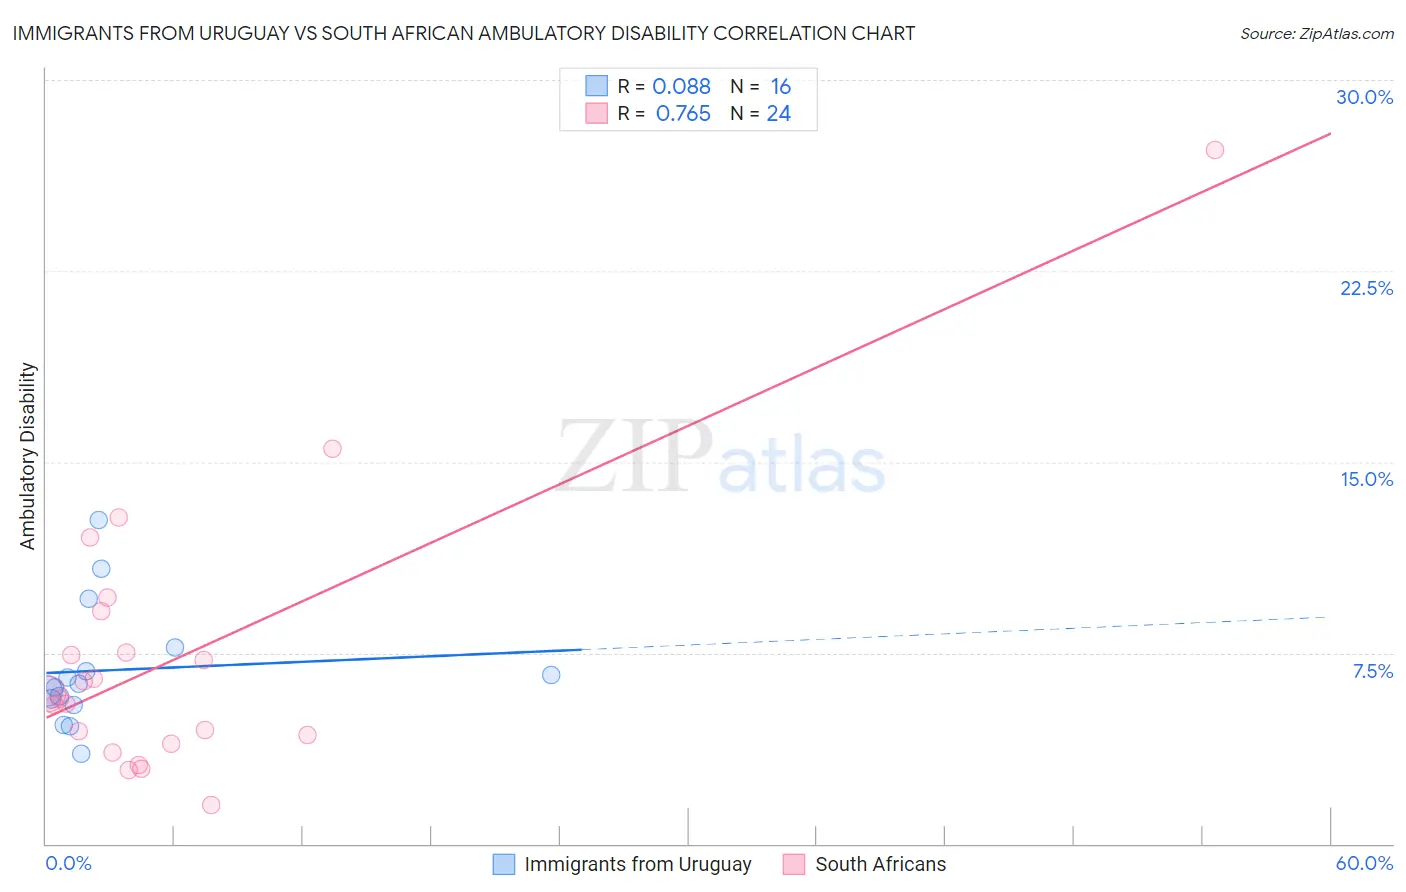 Immigrants from Uruguay vs South African Ambulatory Disability